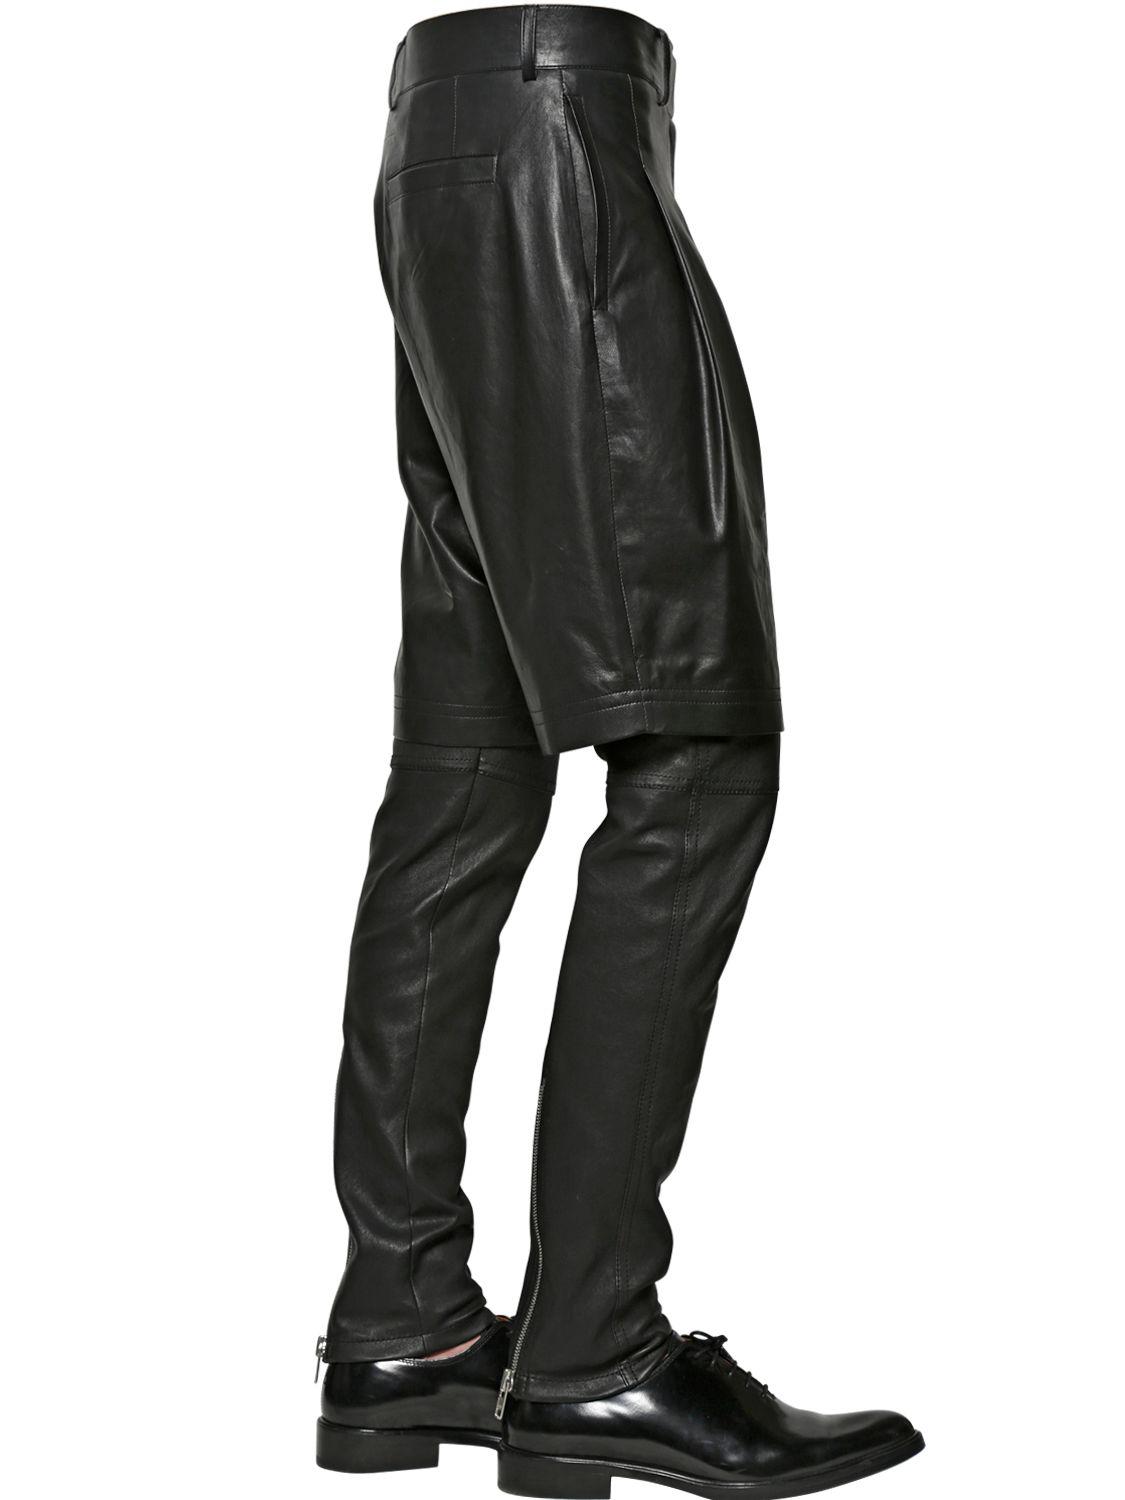 Lyst - Givenchy Light Nappa Leather Bermuda Shorts in Black for Men